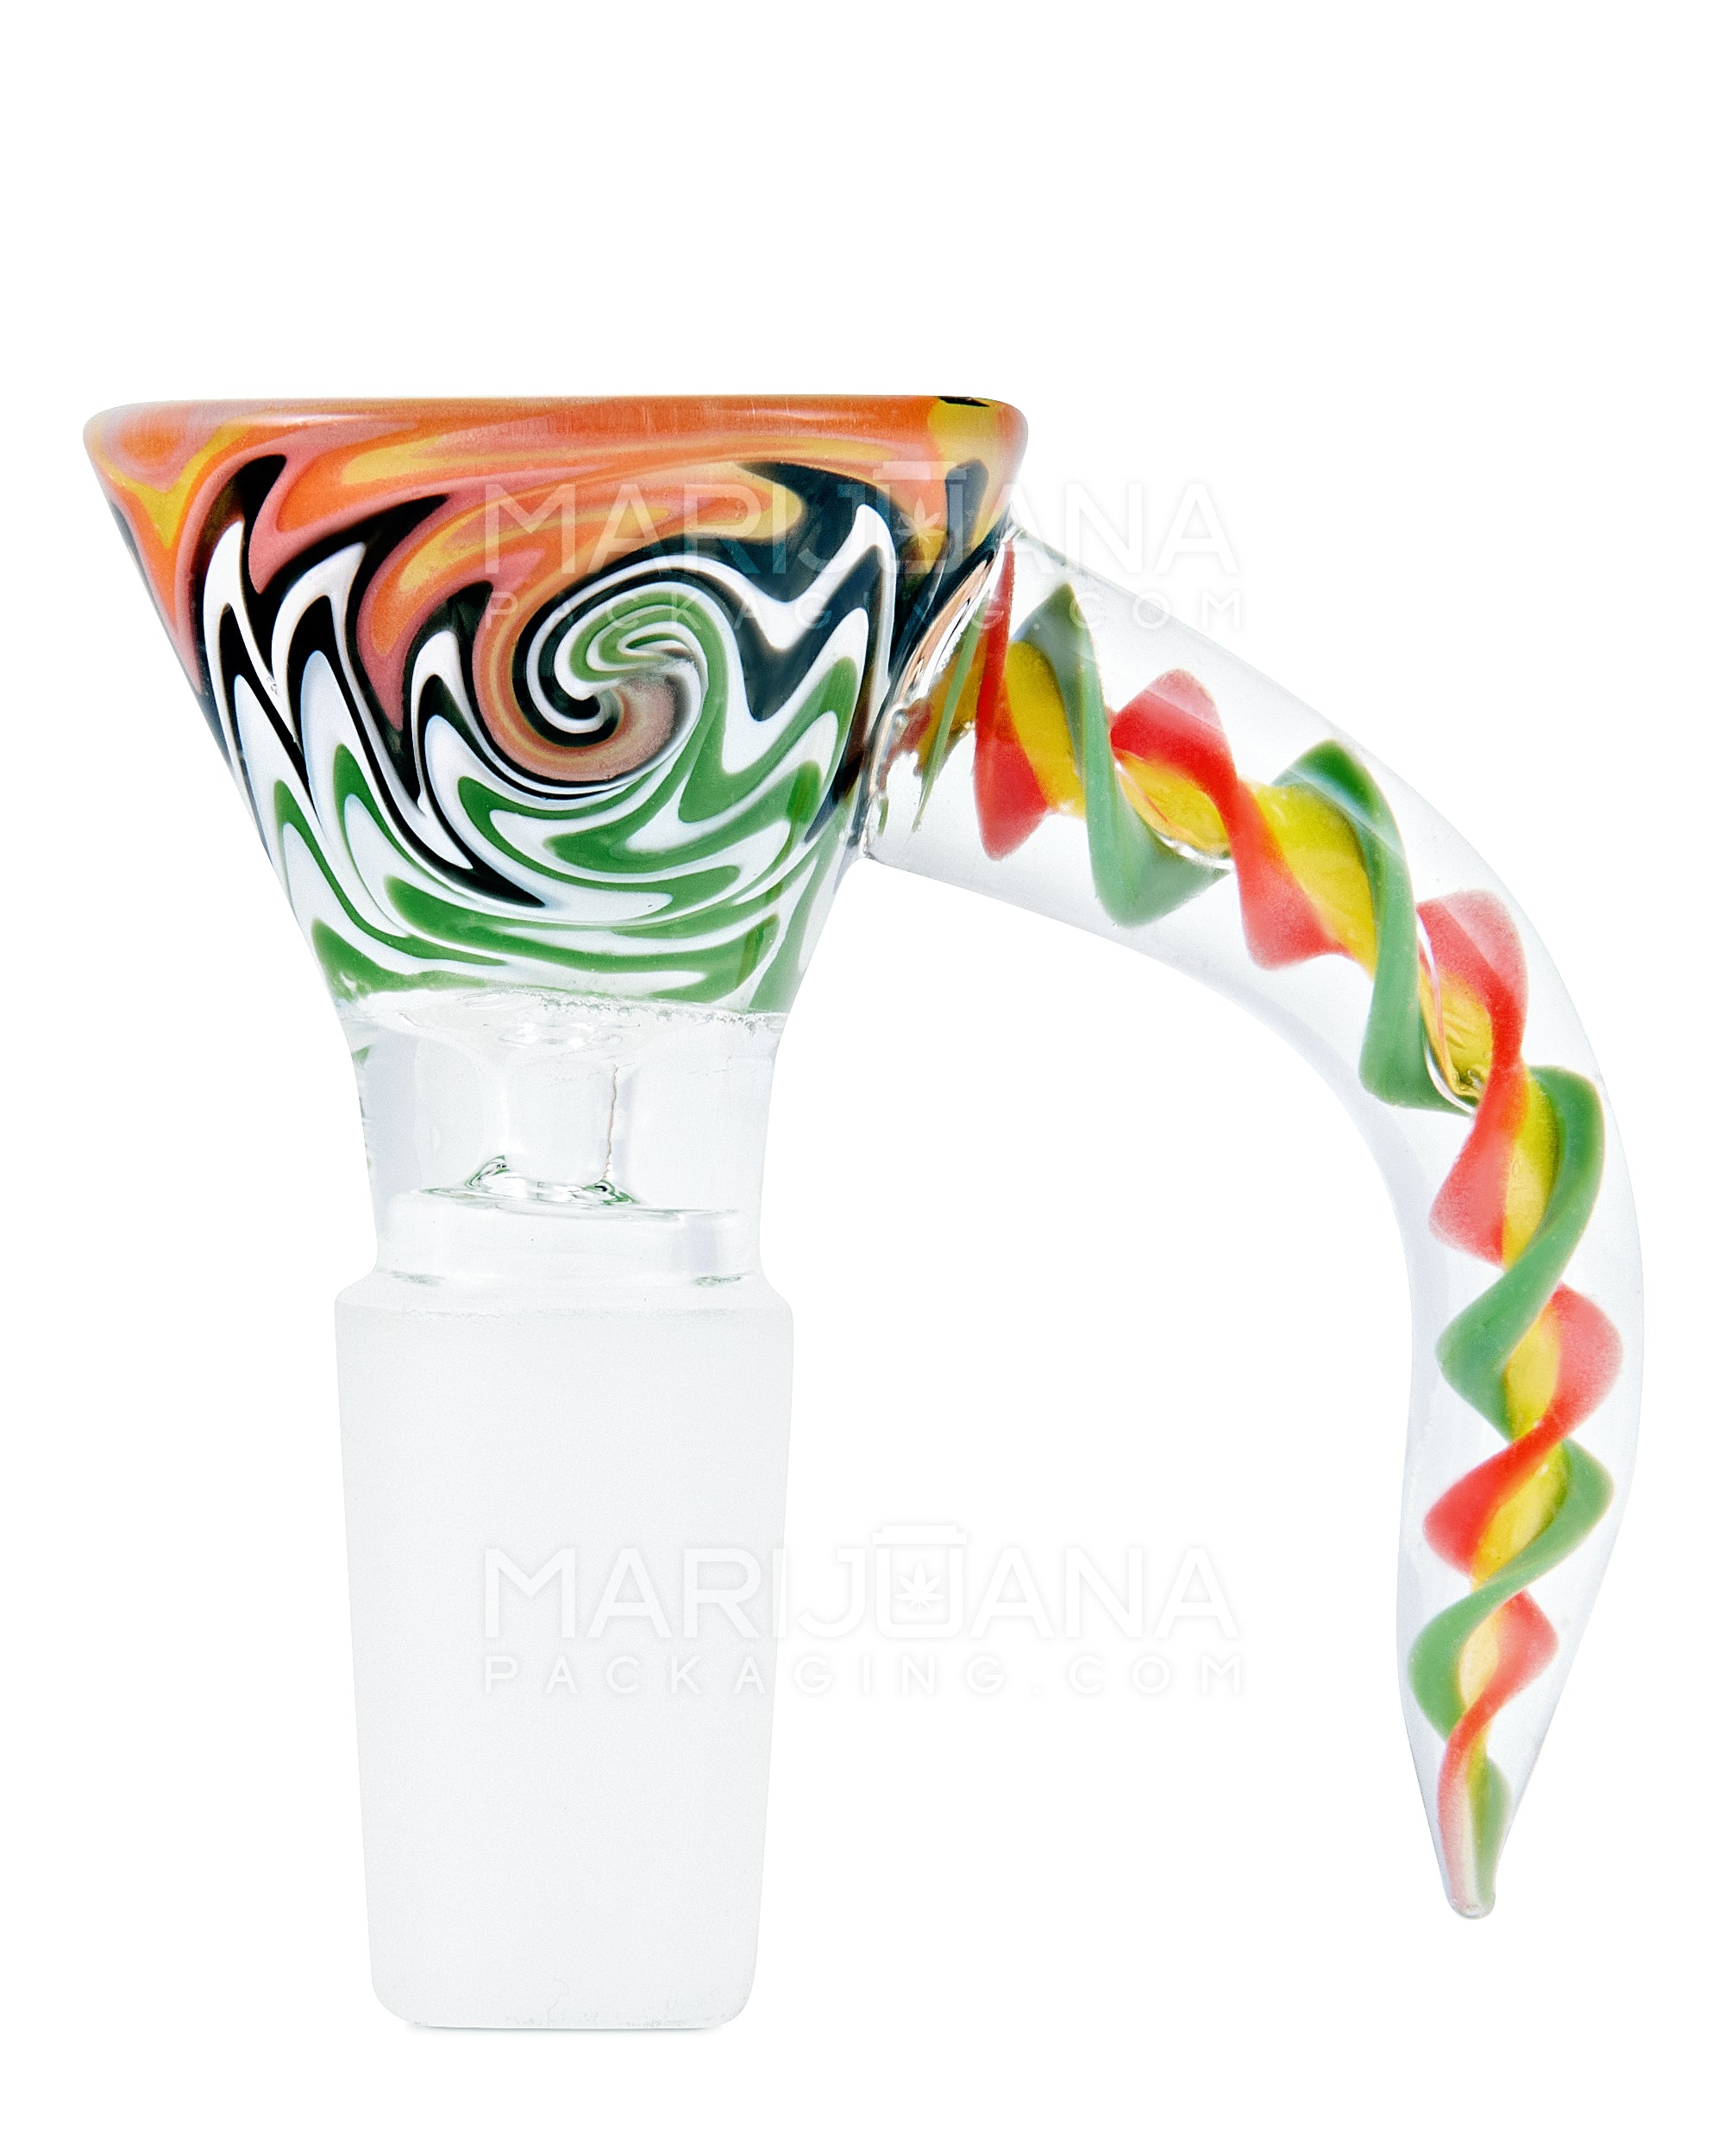 Wig Wag Bowl w/ Spiral Horn Handle | Glass - 14mm - Assorted - 1